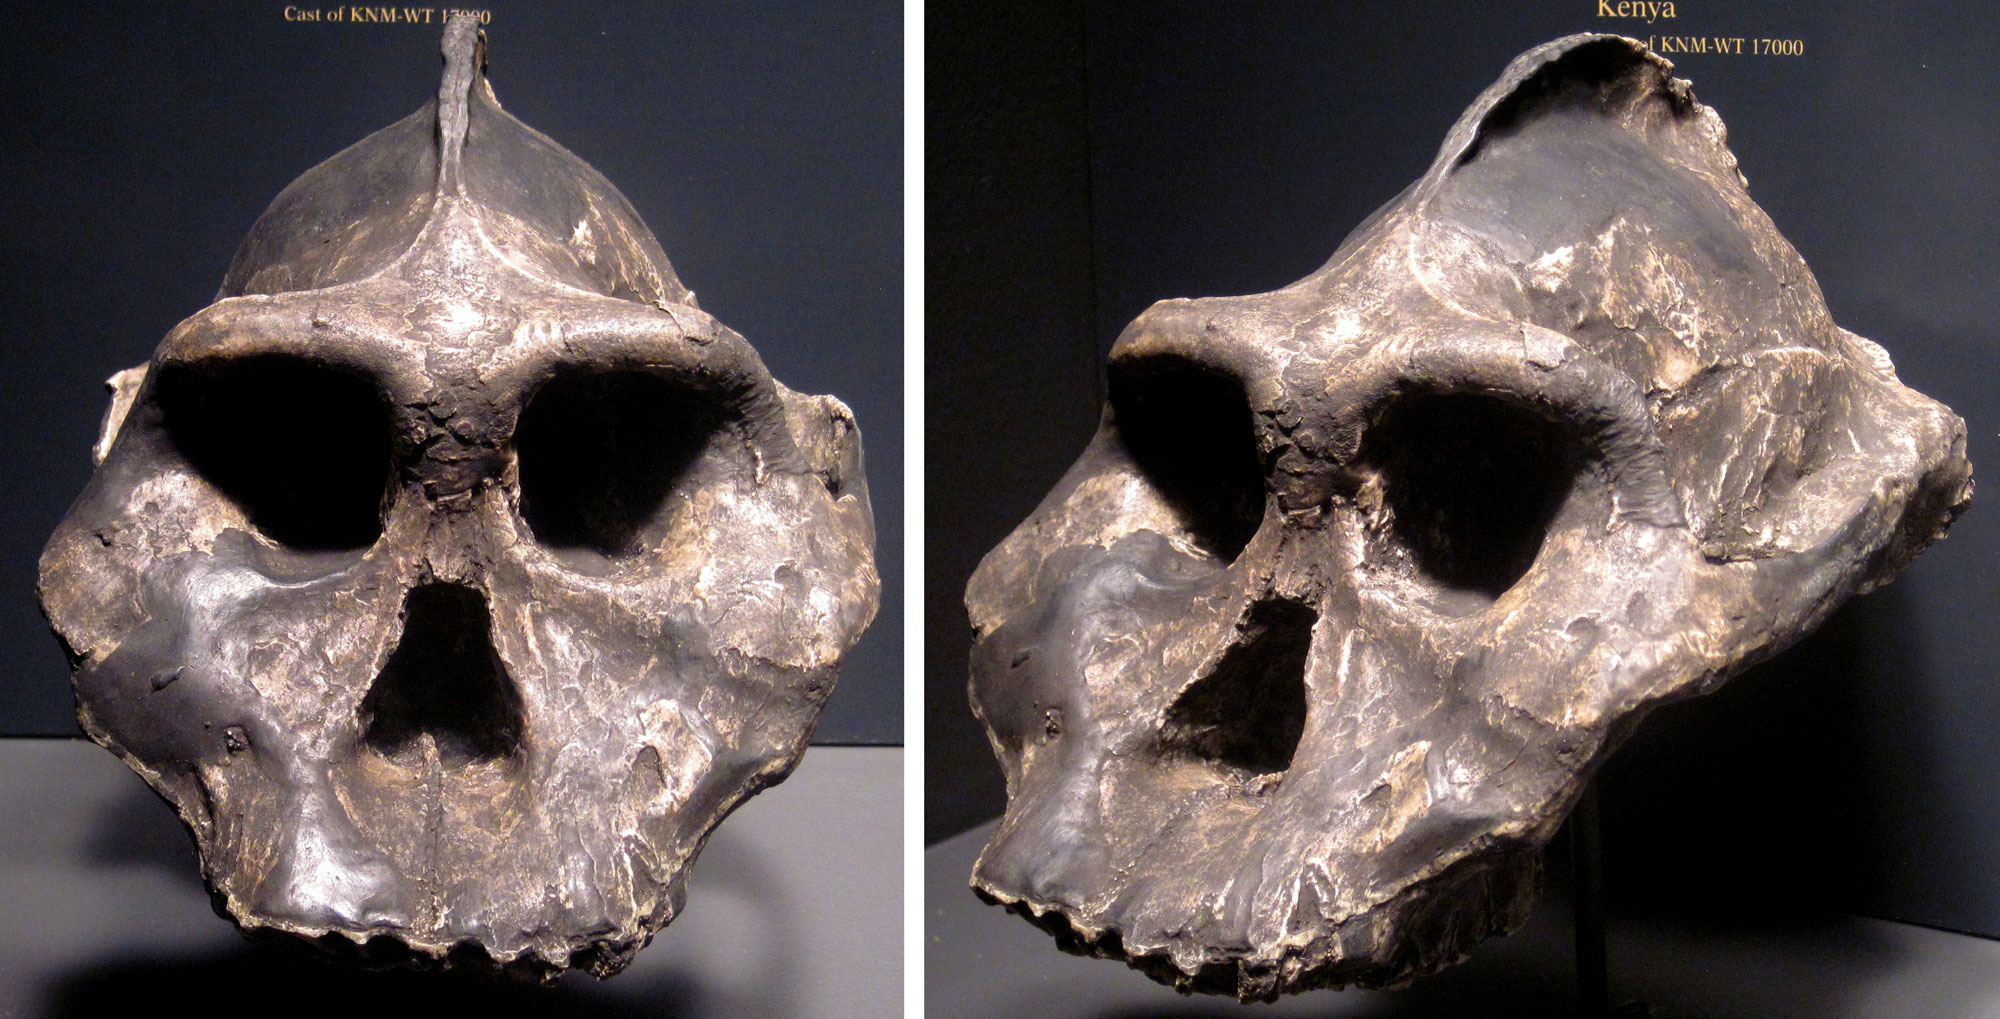 2-panel image showing photographs of a replica skull of Paranthropus aethiopicus from Kenya. Left image: Skull shown from the front. The skull is broad with a tall sagittal crest. Right: Same skull shown from an oblique angle.